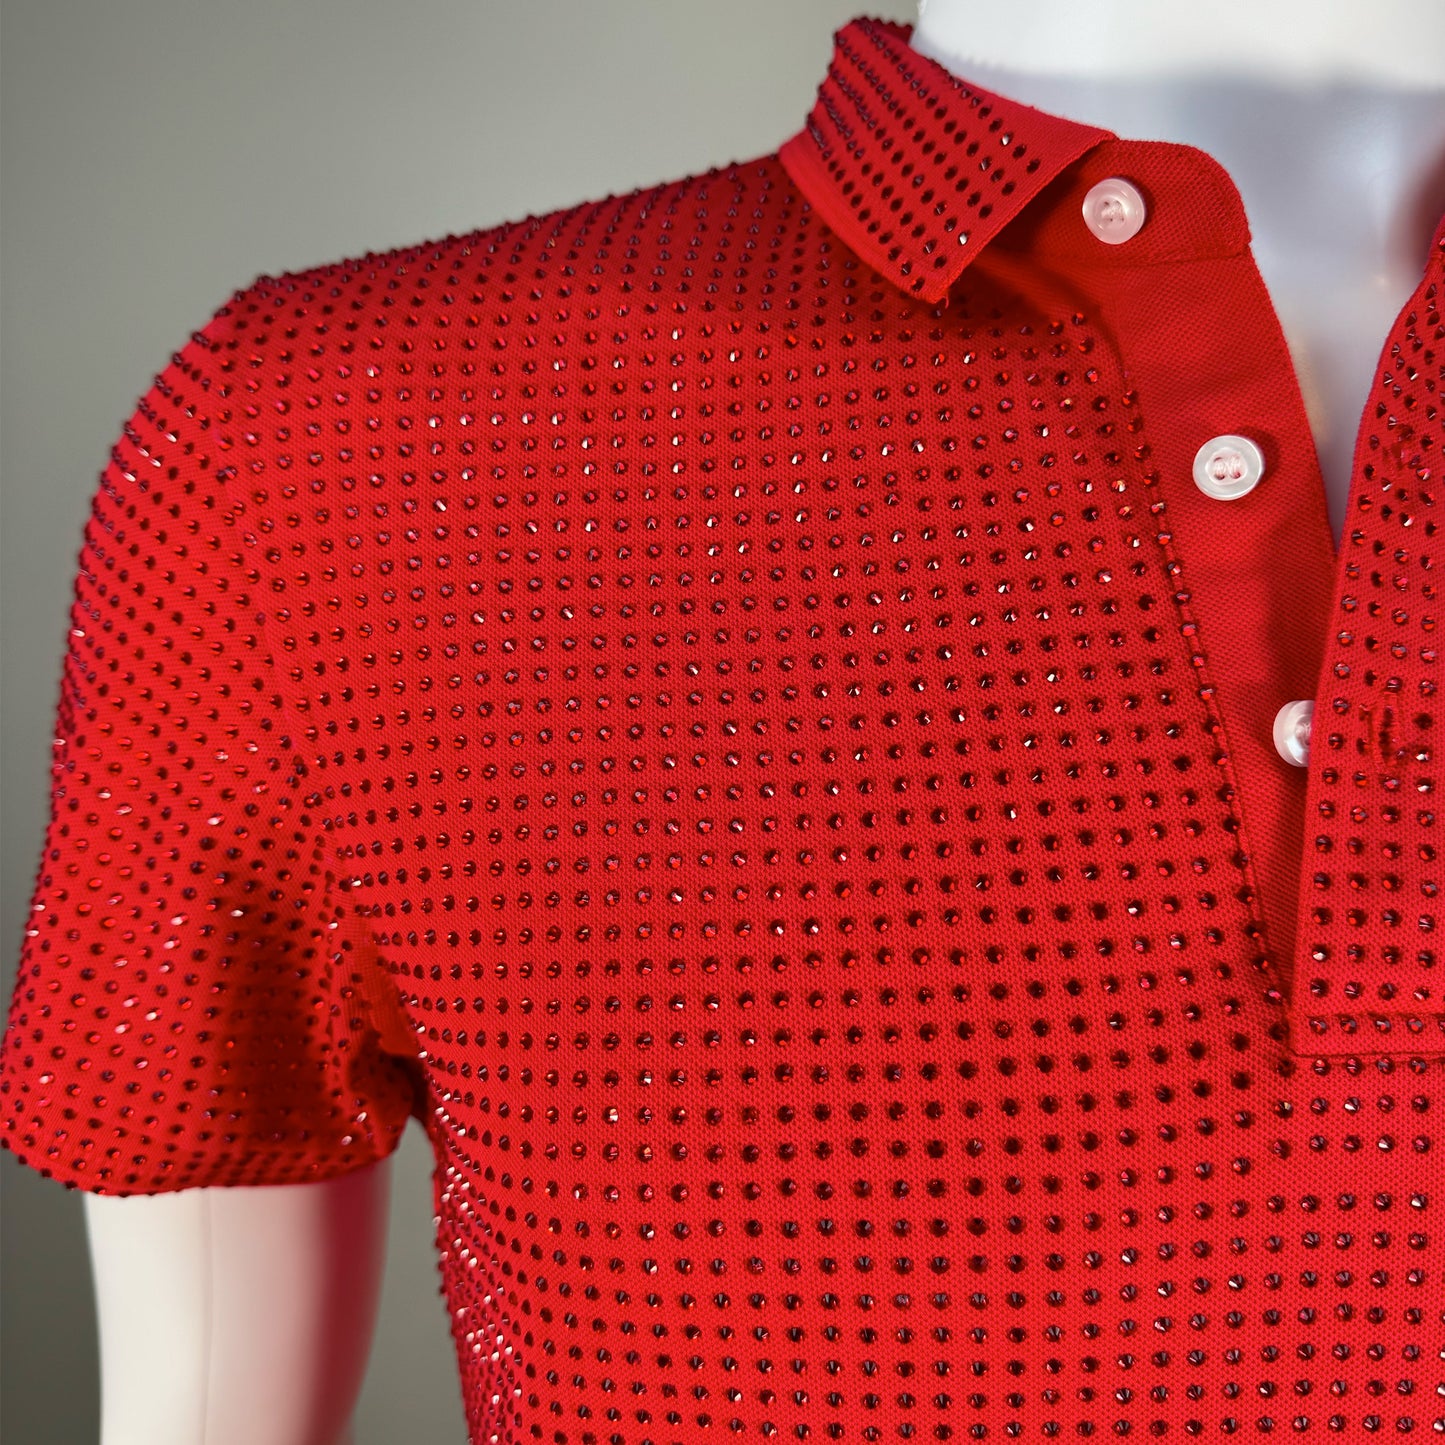 Lt. Siam Crystals on Dark Red Fabric Polo